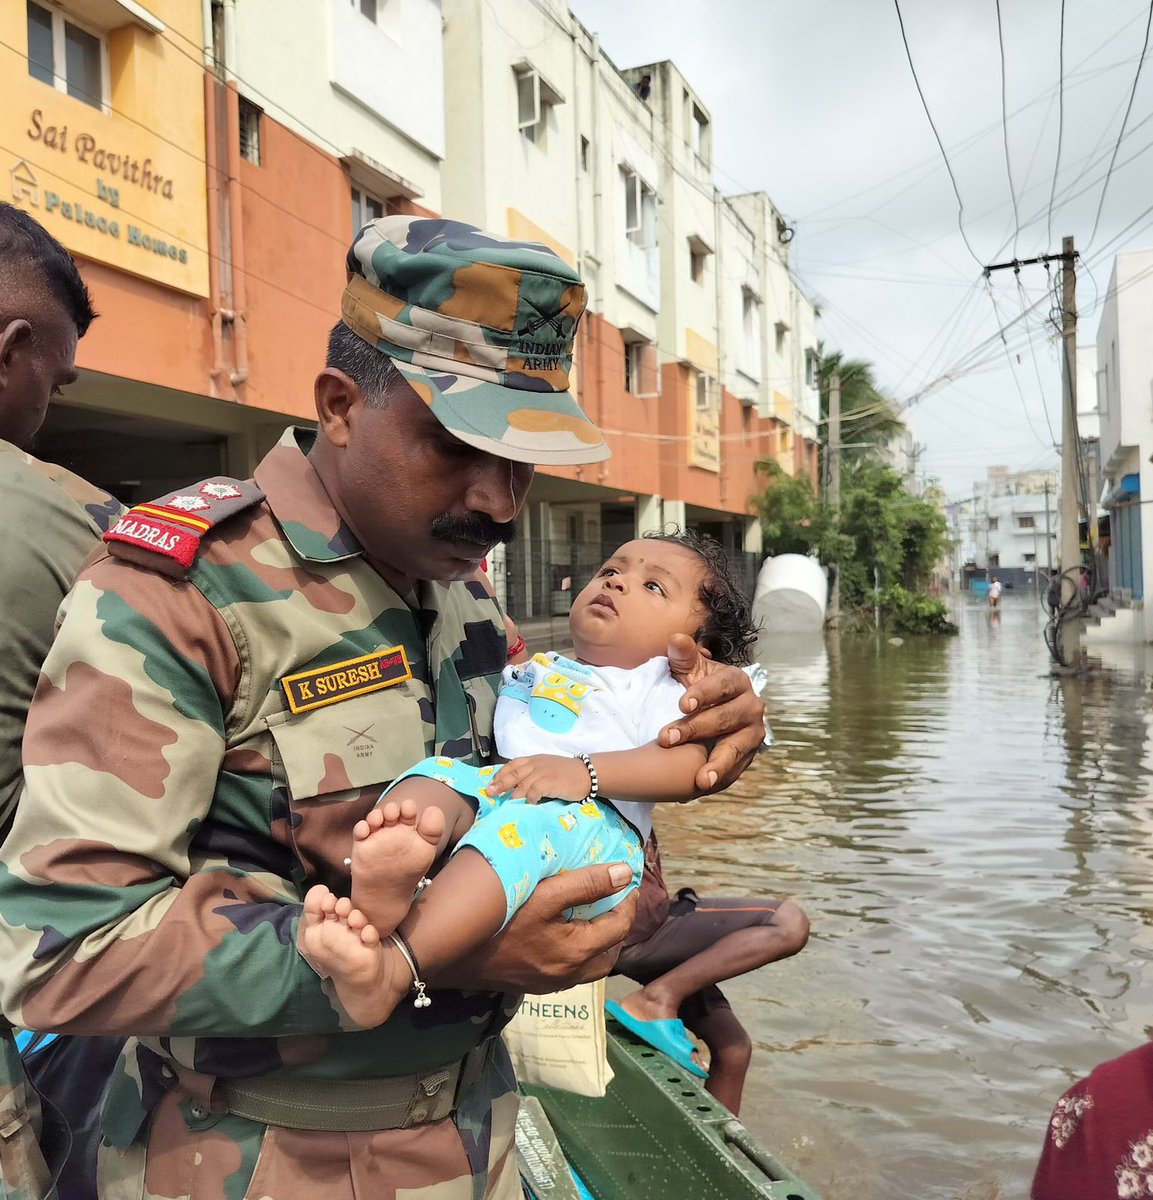 Salute to Indian Army 🇮🇳

#ChennaiFloods2023 #ChennaiRains #CycloneMichaung #ChennaiFlood #ChennaiRains #ChennaiRains2023 #chennaicyclone